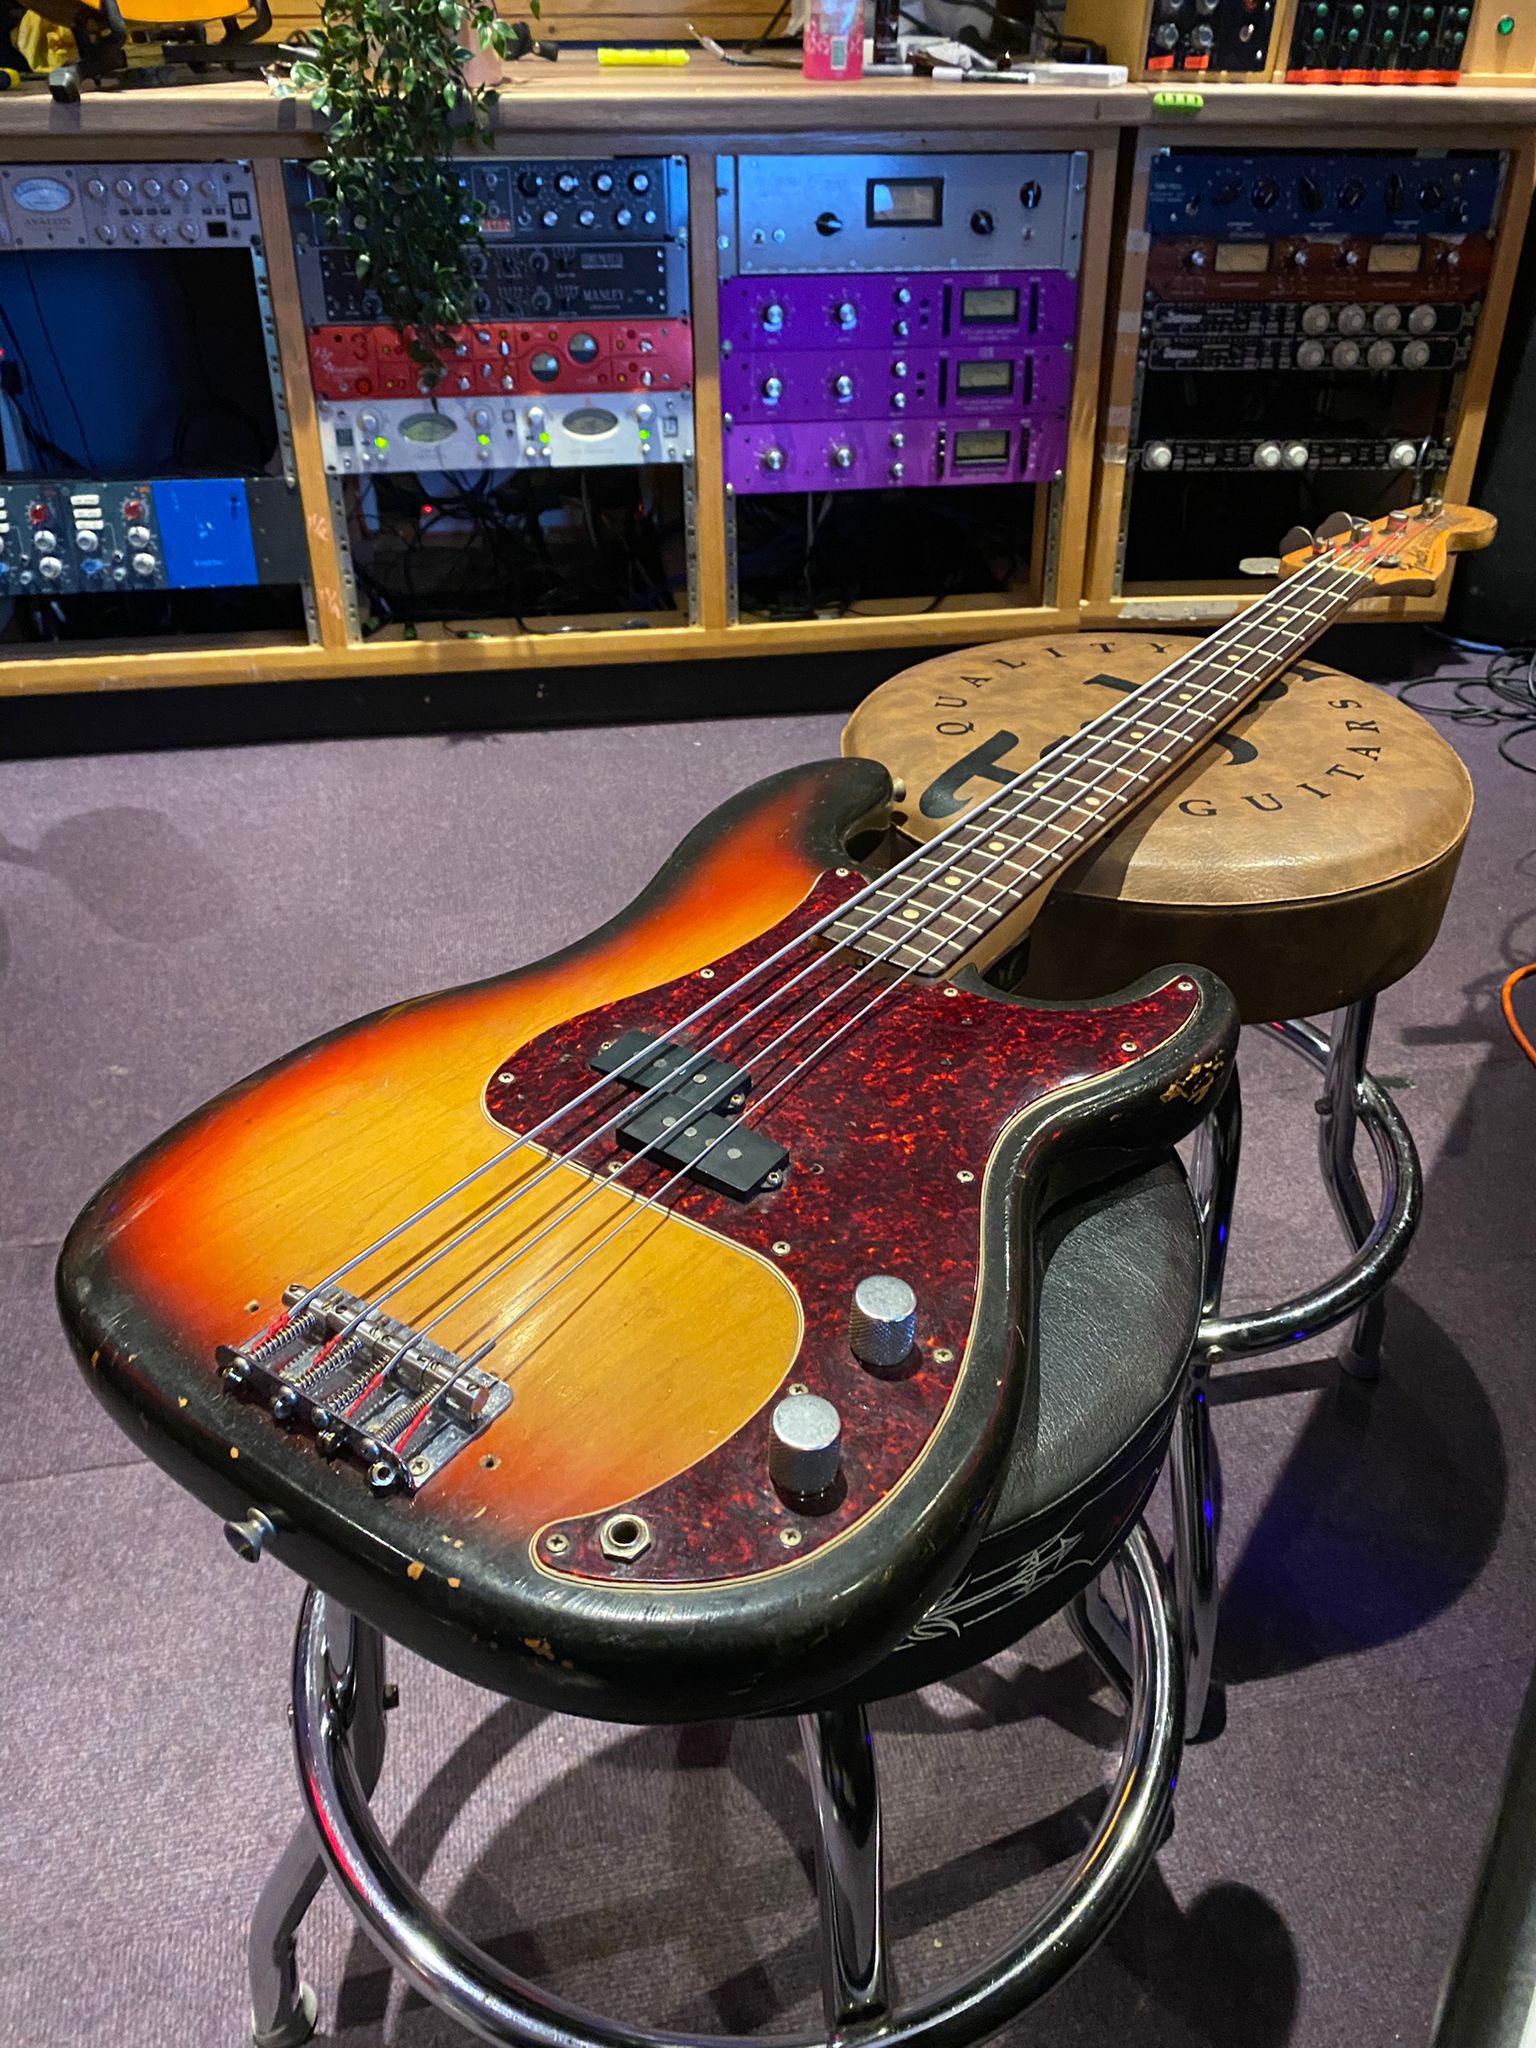 1972 Fender Precision Bass artist owned by John Entwistle of The Who